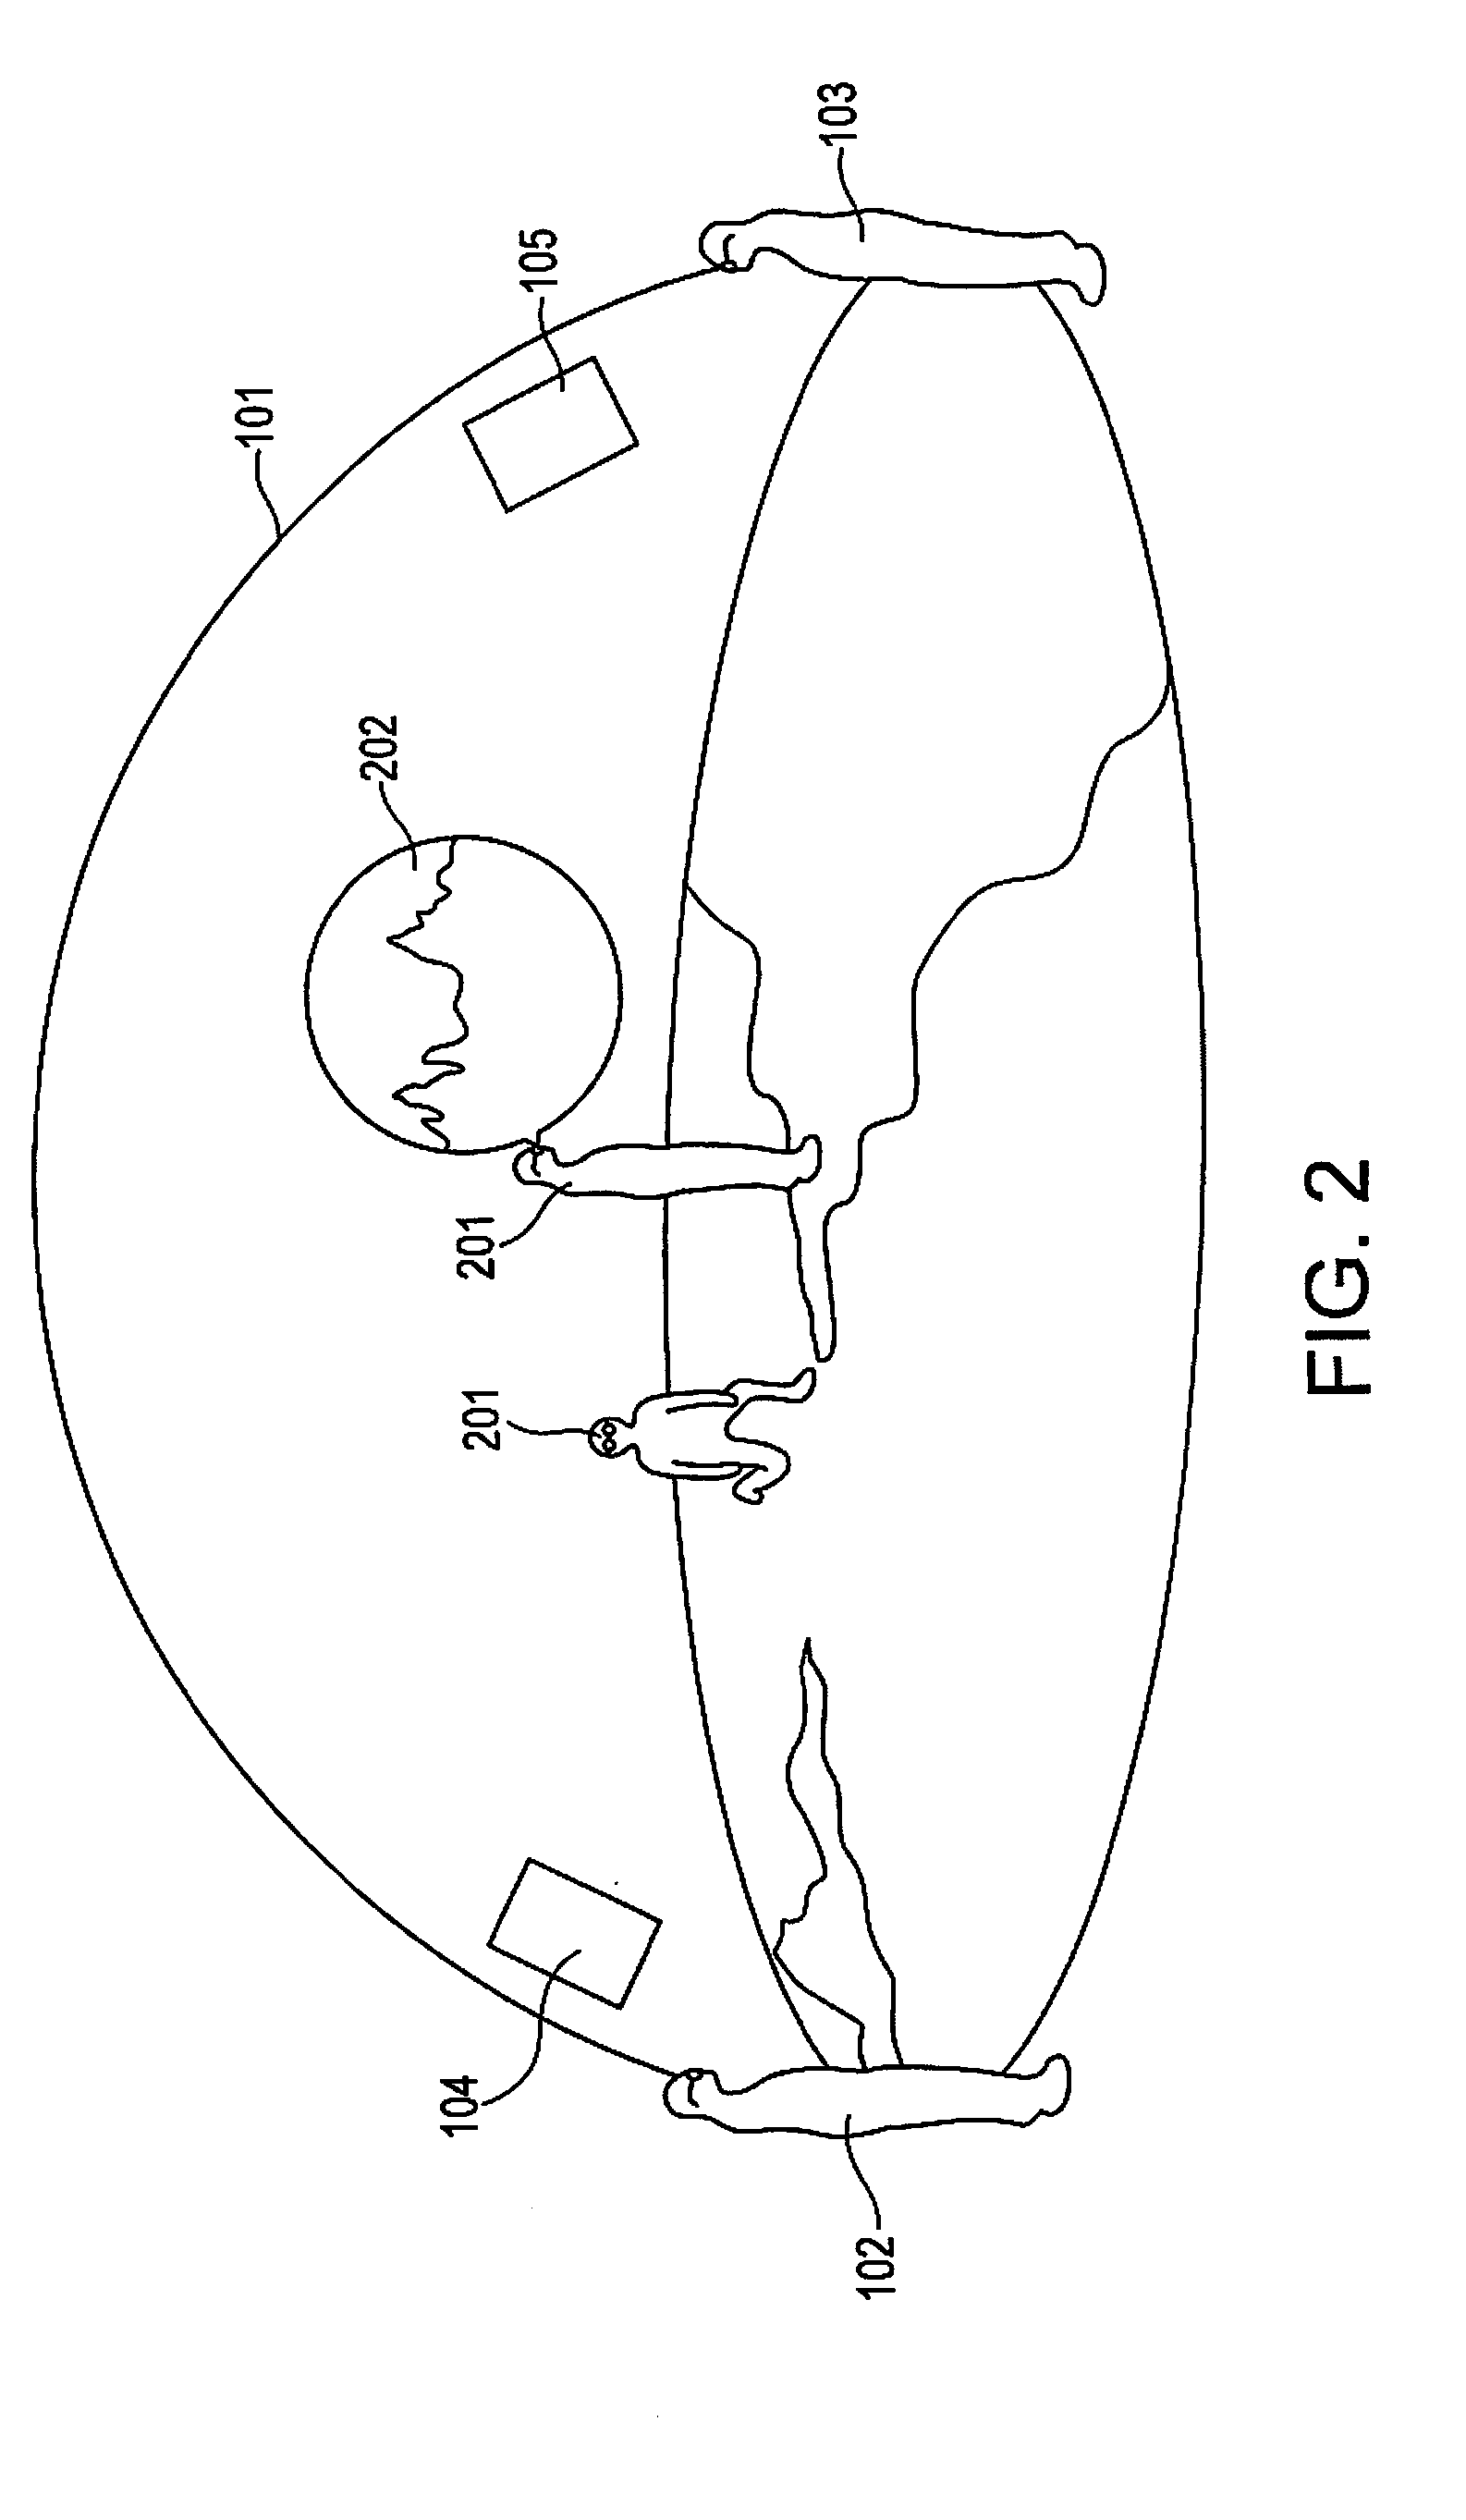 System and Method for 3-Dimensional Display of Image Data